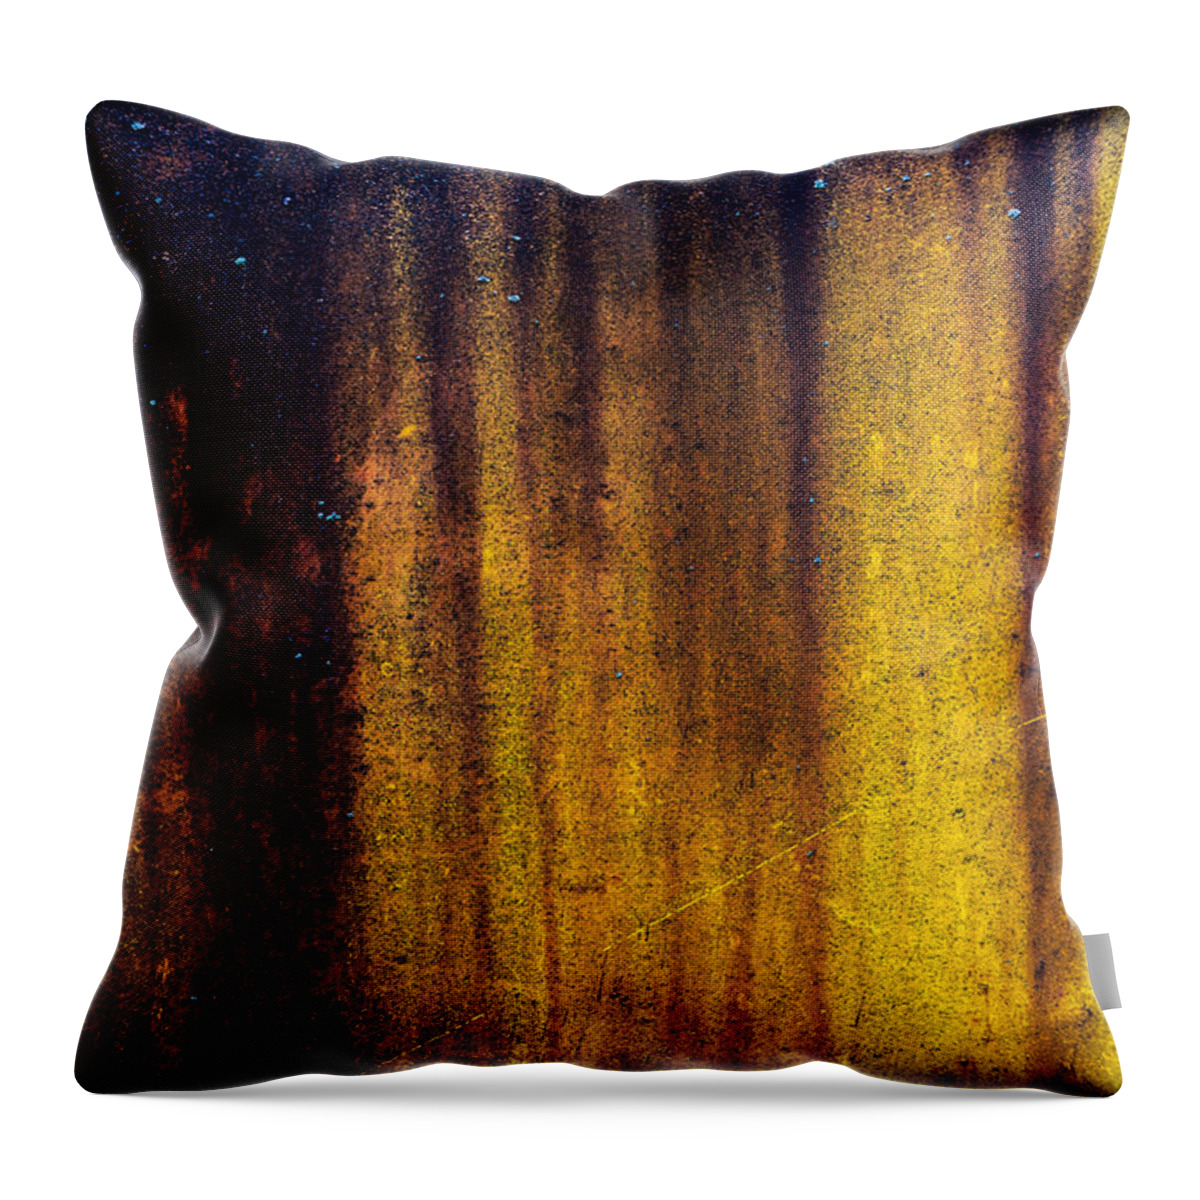 Yellow Throw Pillow featuring the photograph Yellow Texture by Carrie Hannigan